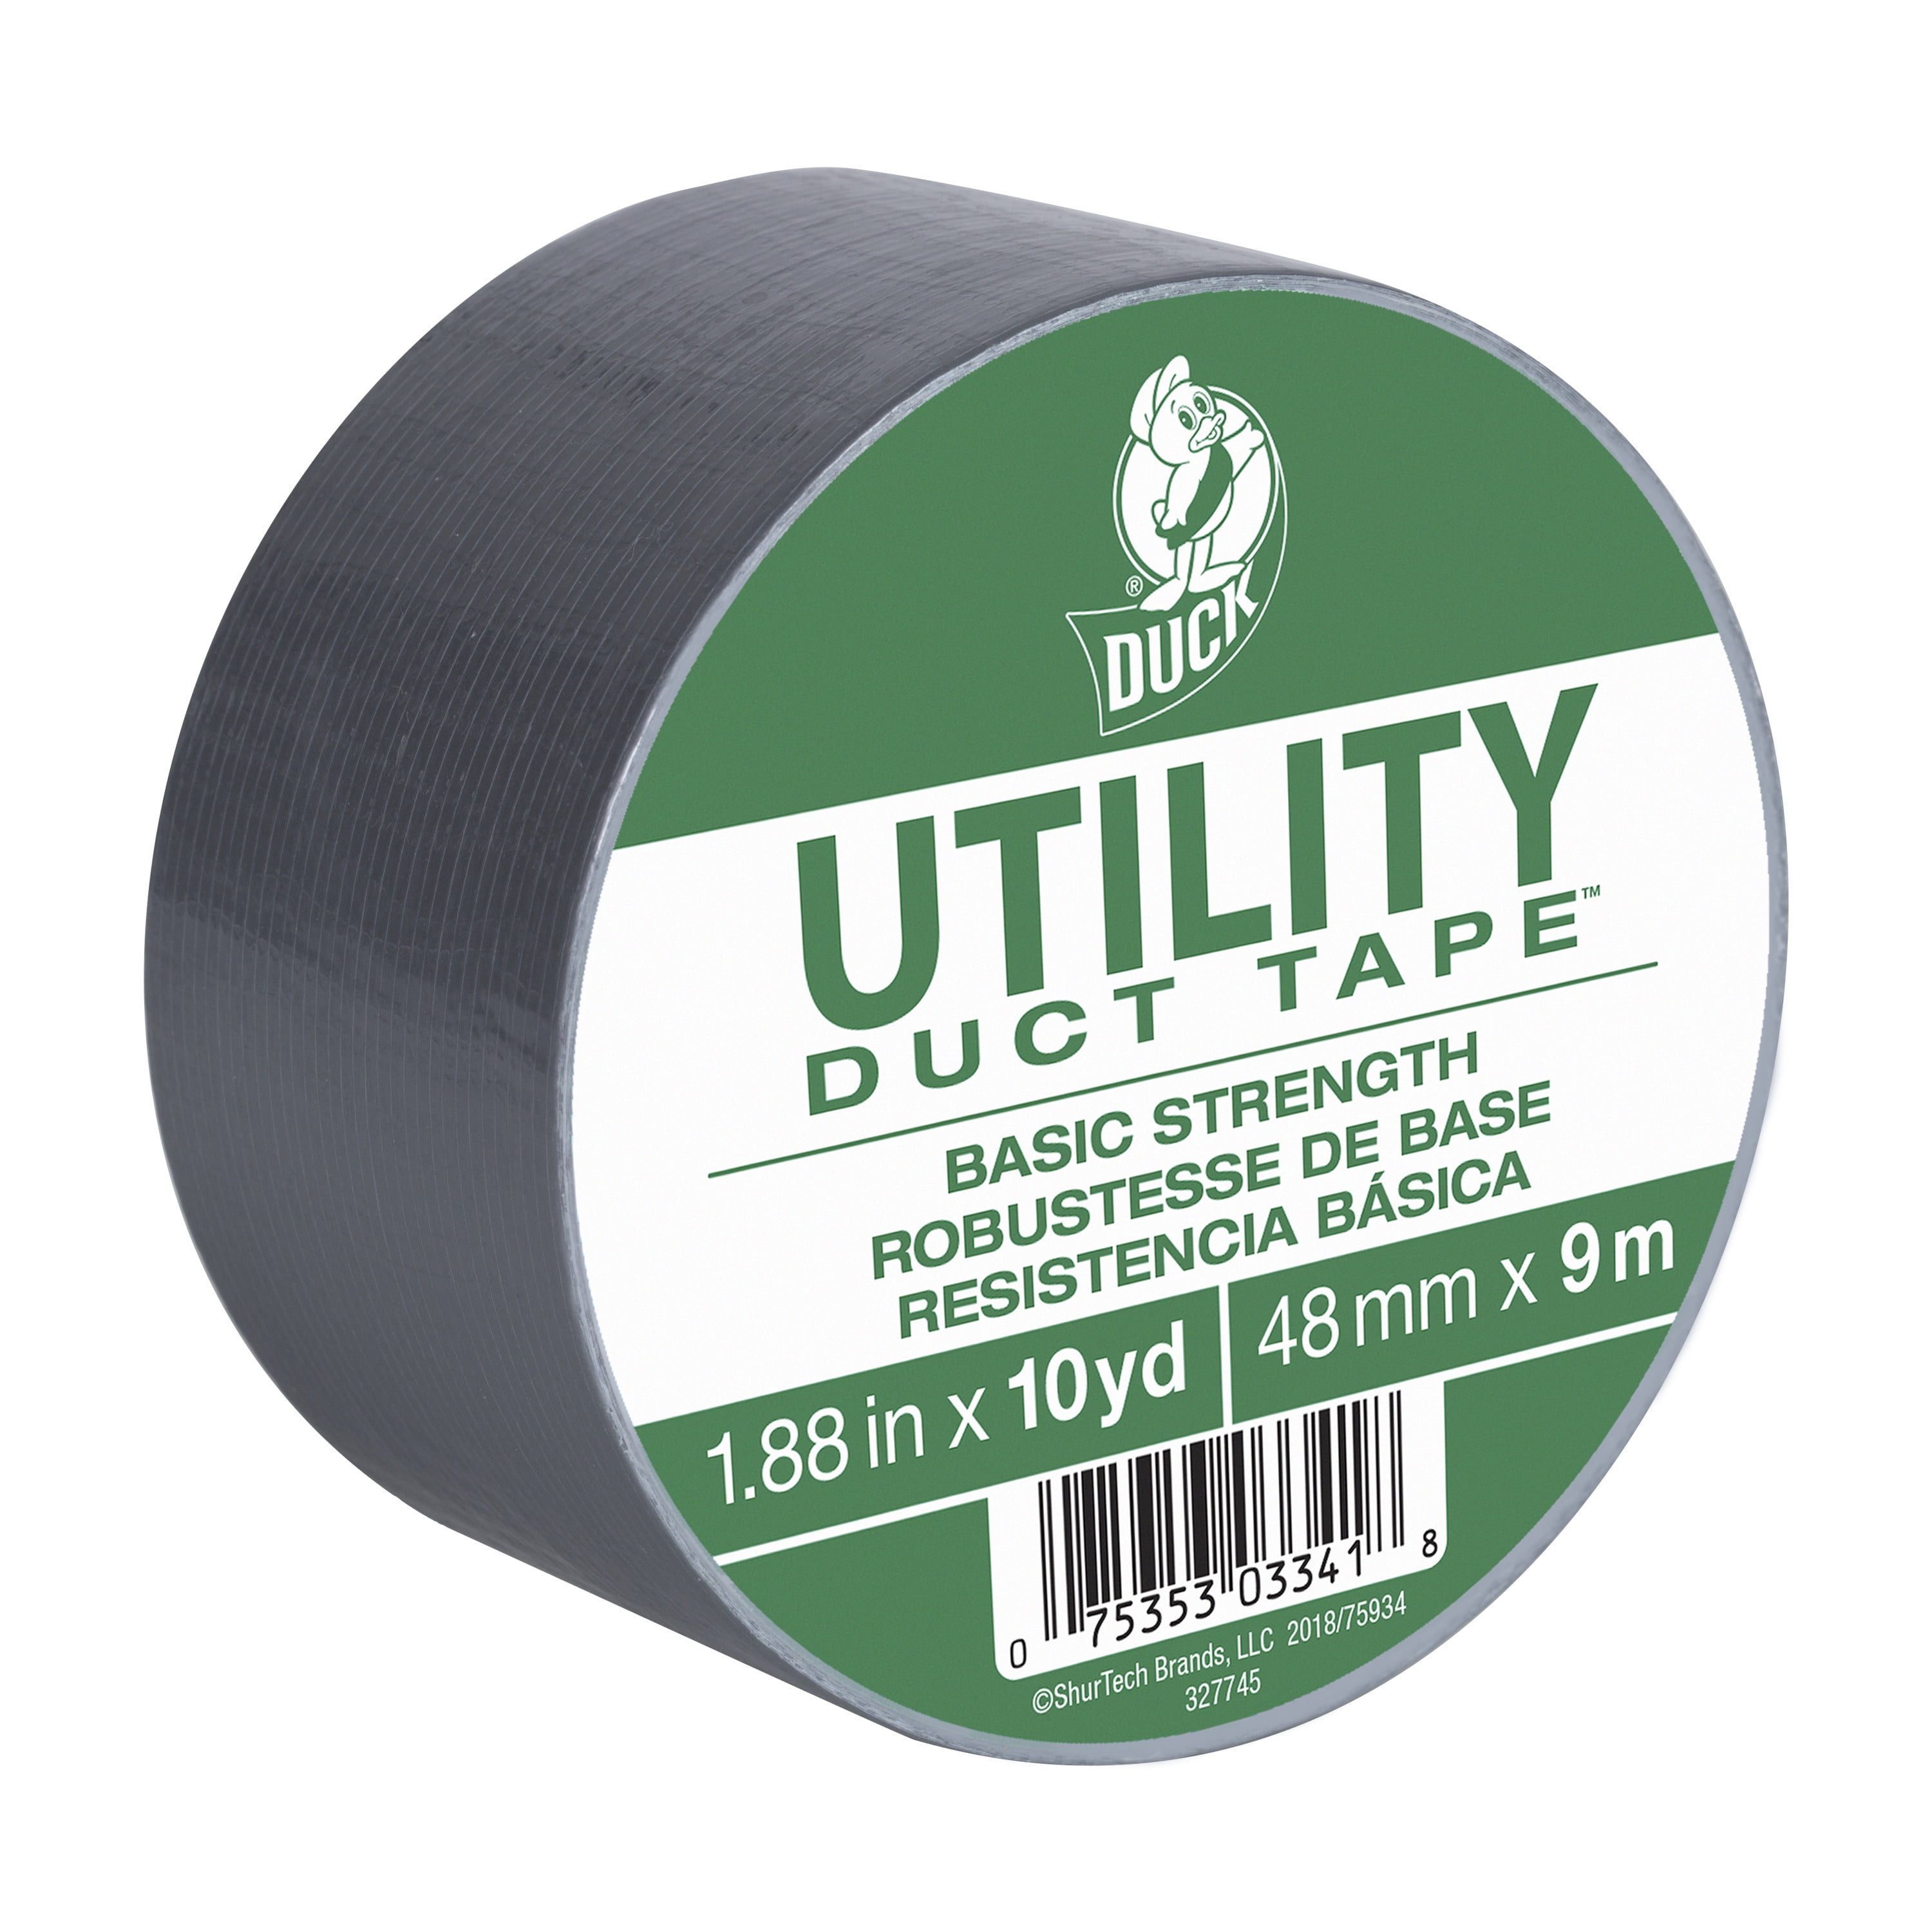 Duct Repair Tape 2"x60 Yard Emergency Survival First Aid Camping Kit Green 